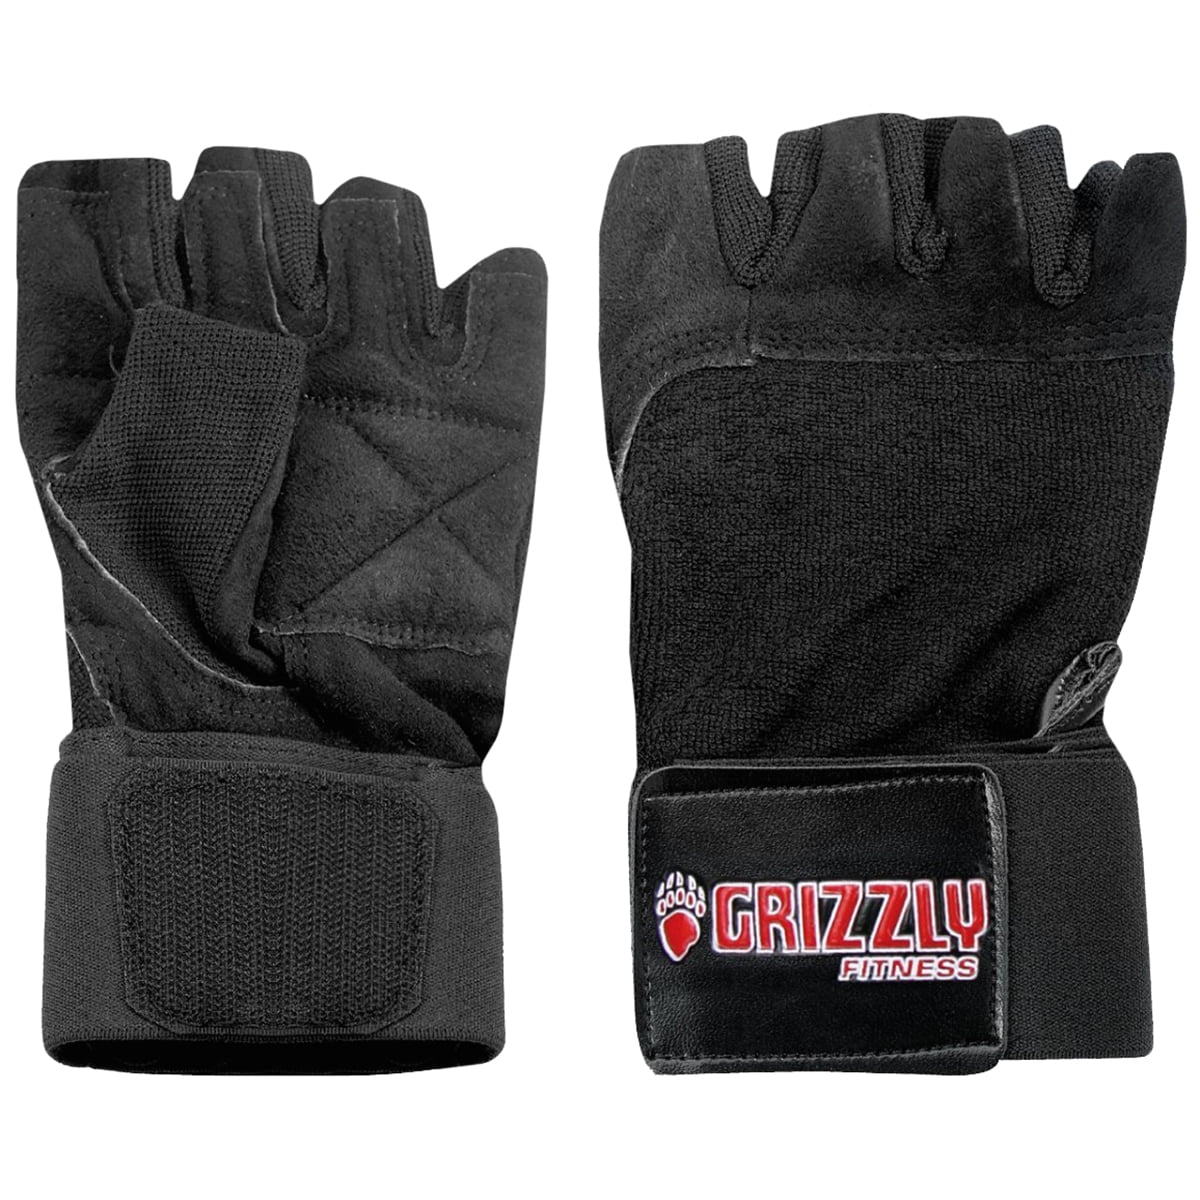 Crossfit Padded Black Grizzly Fitness Power Paw Wrist Wrap Lifting Gloves 